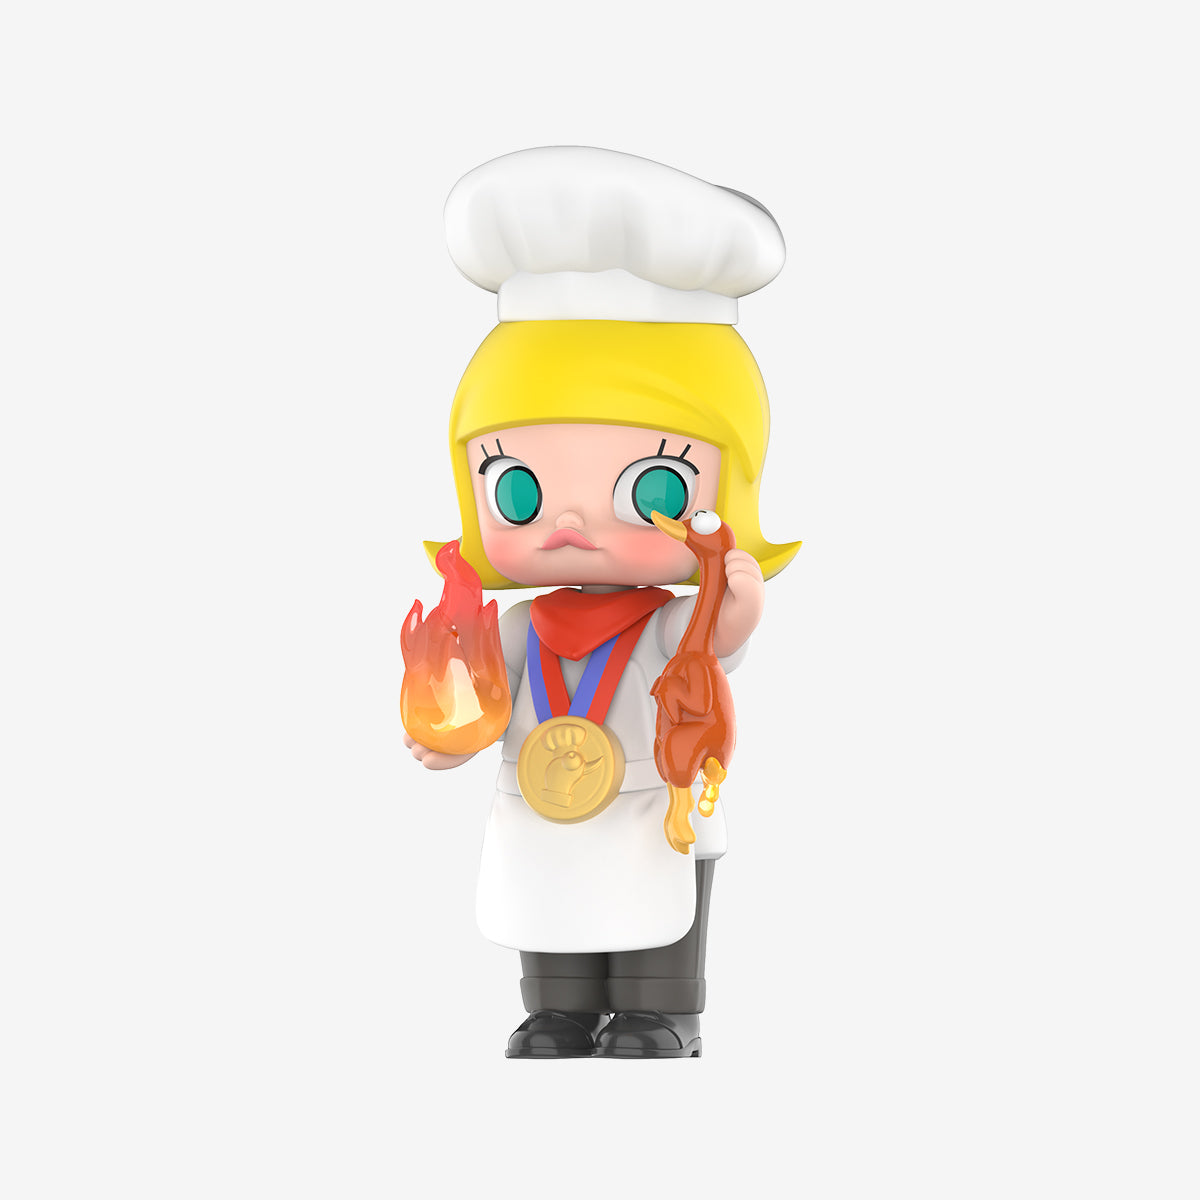 【New】Pop Mart: MOLLY My Instant Superpower Series Figures